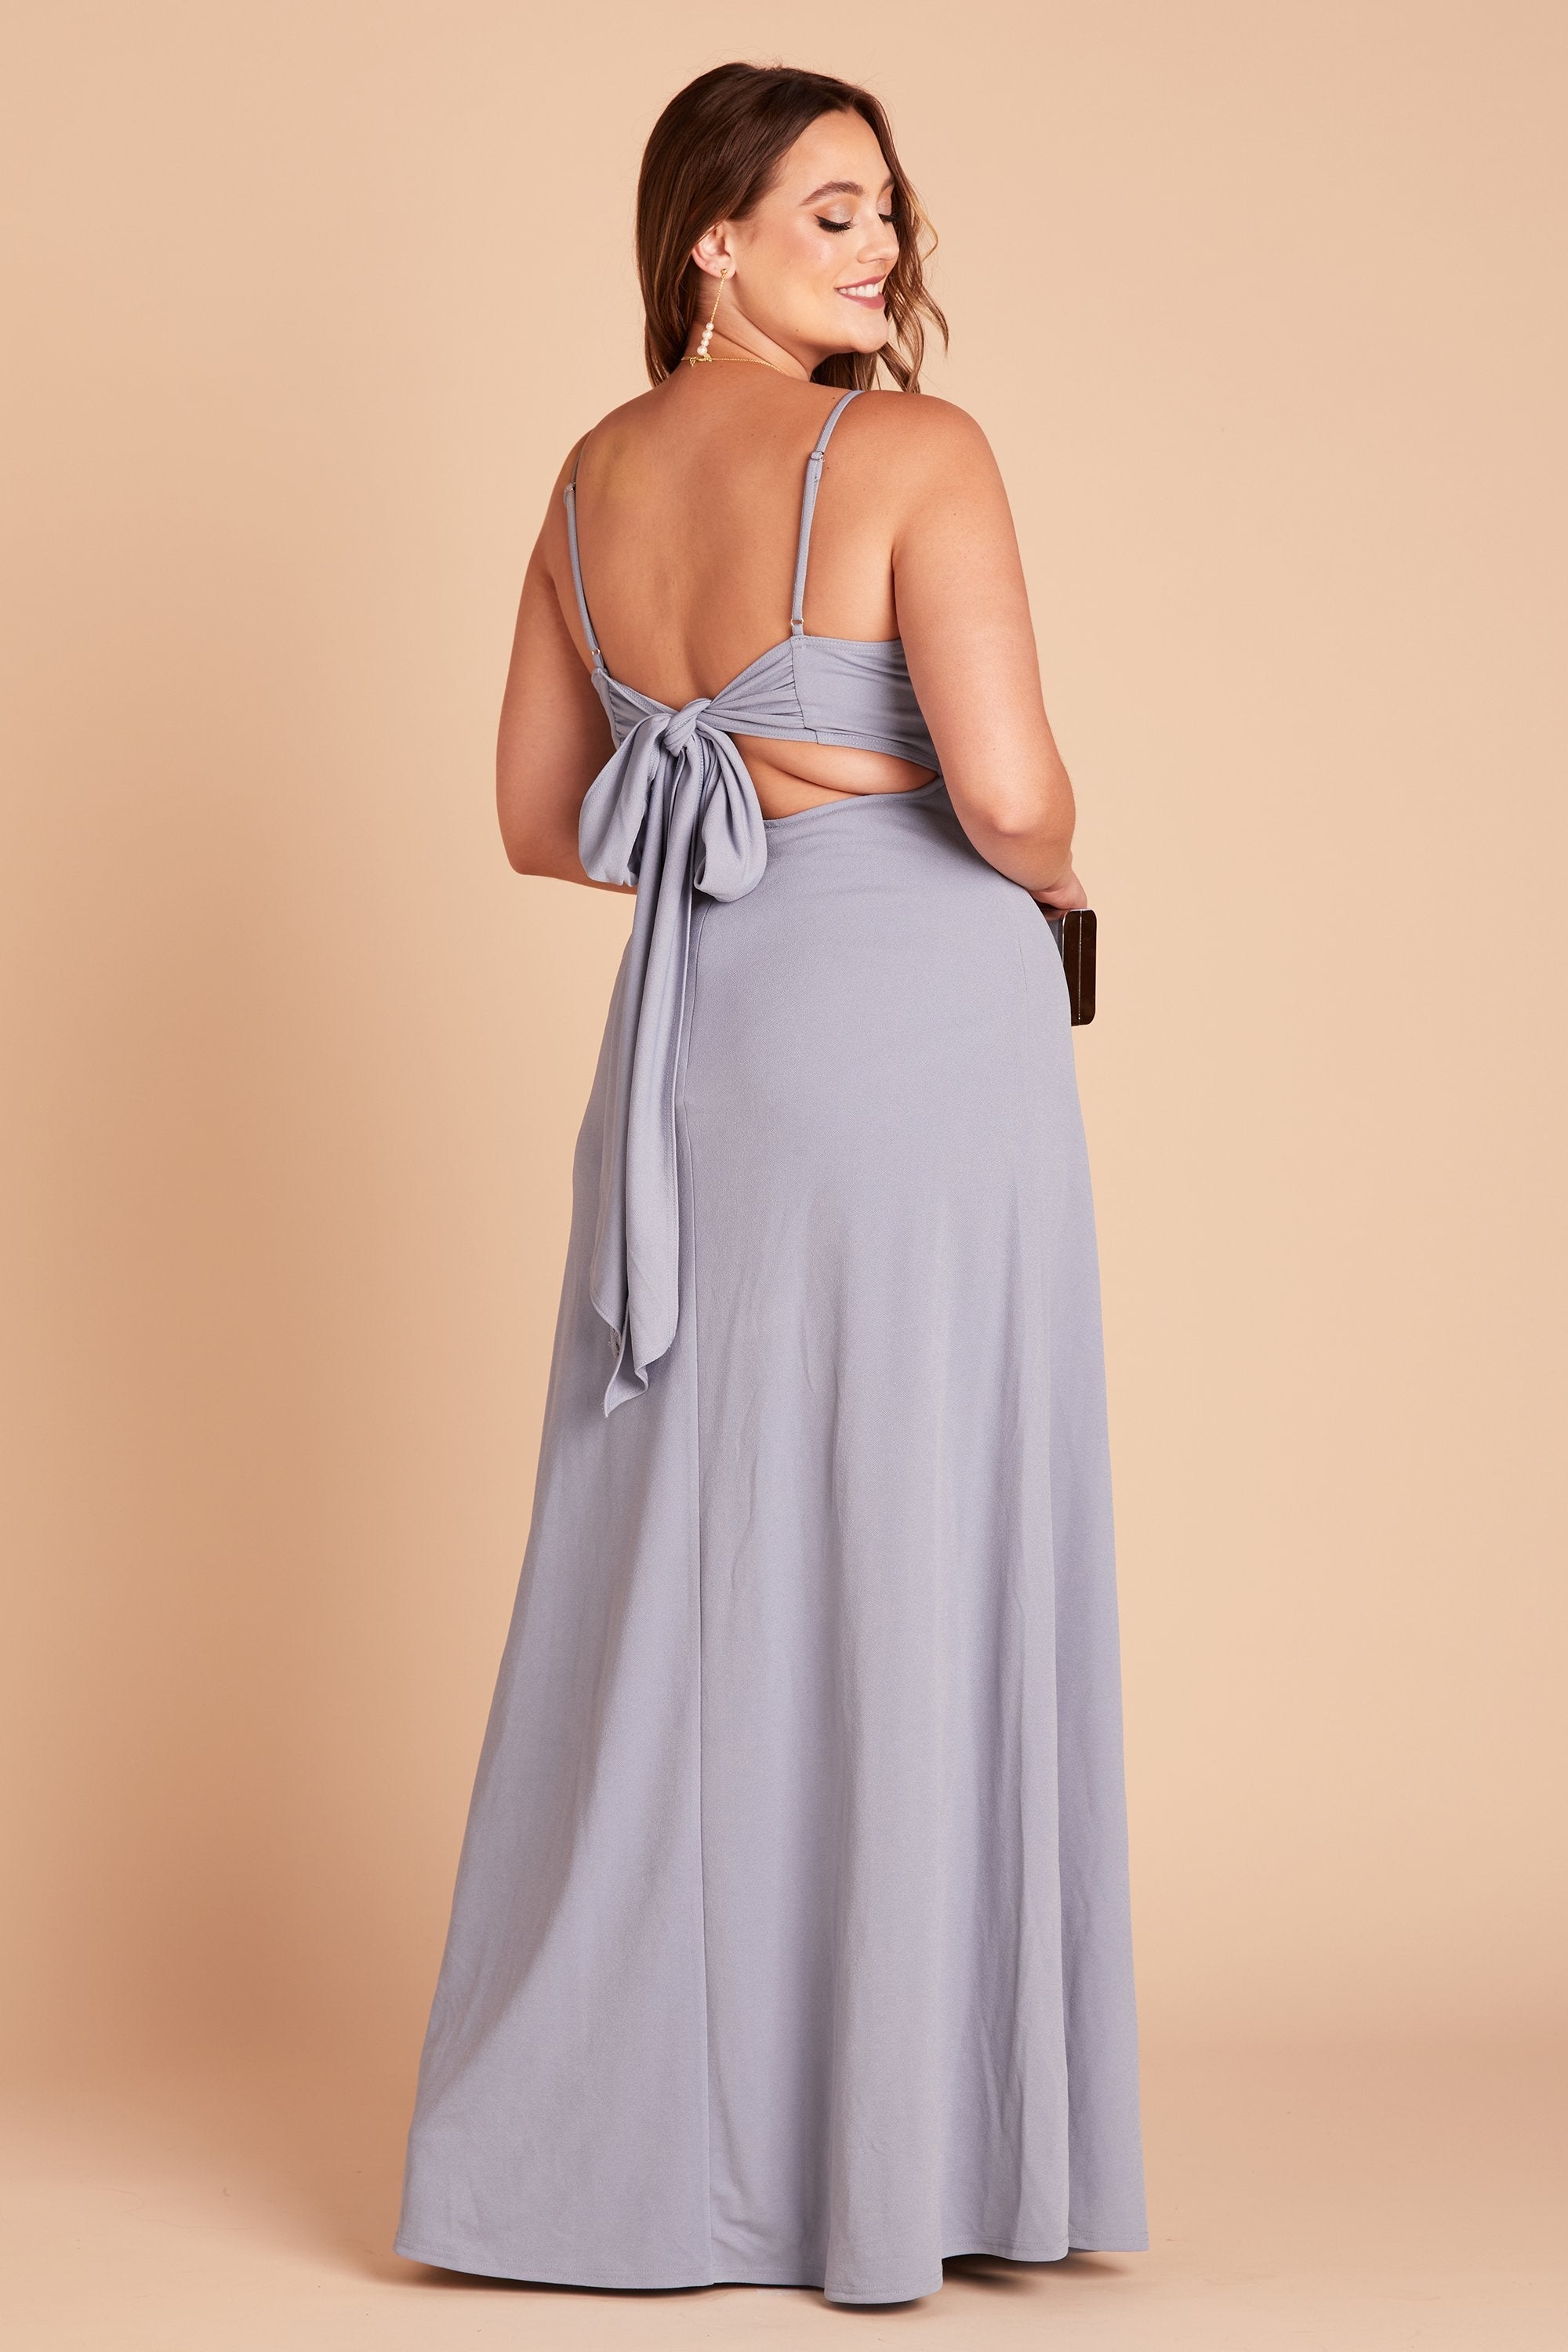 Benny plus size bridesmaid dress in dusty blue crepe by Birdy Grey, back view